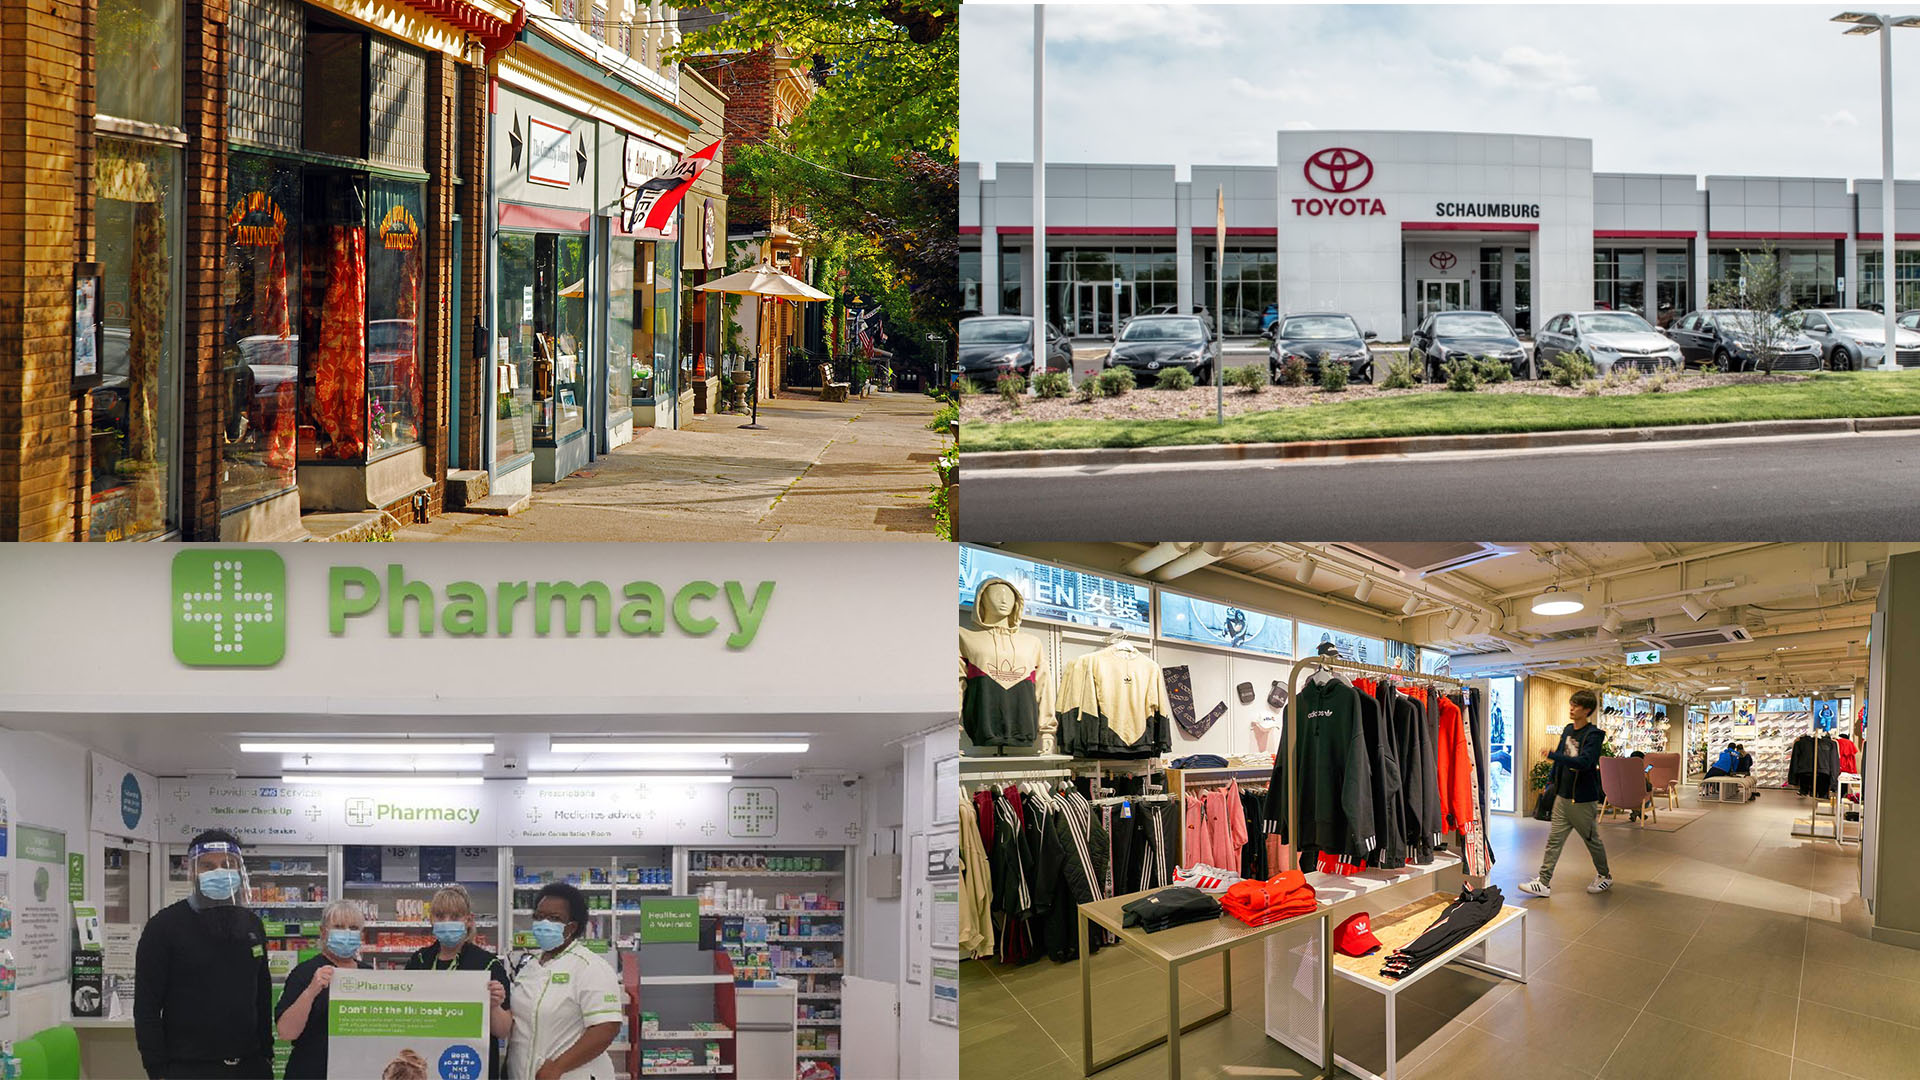 This picture shows several local shops, providing an example of what local shops look like.